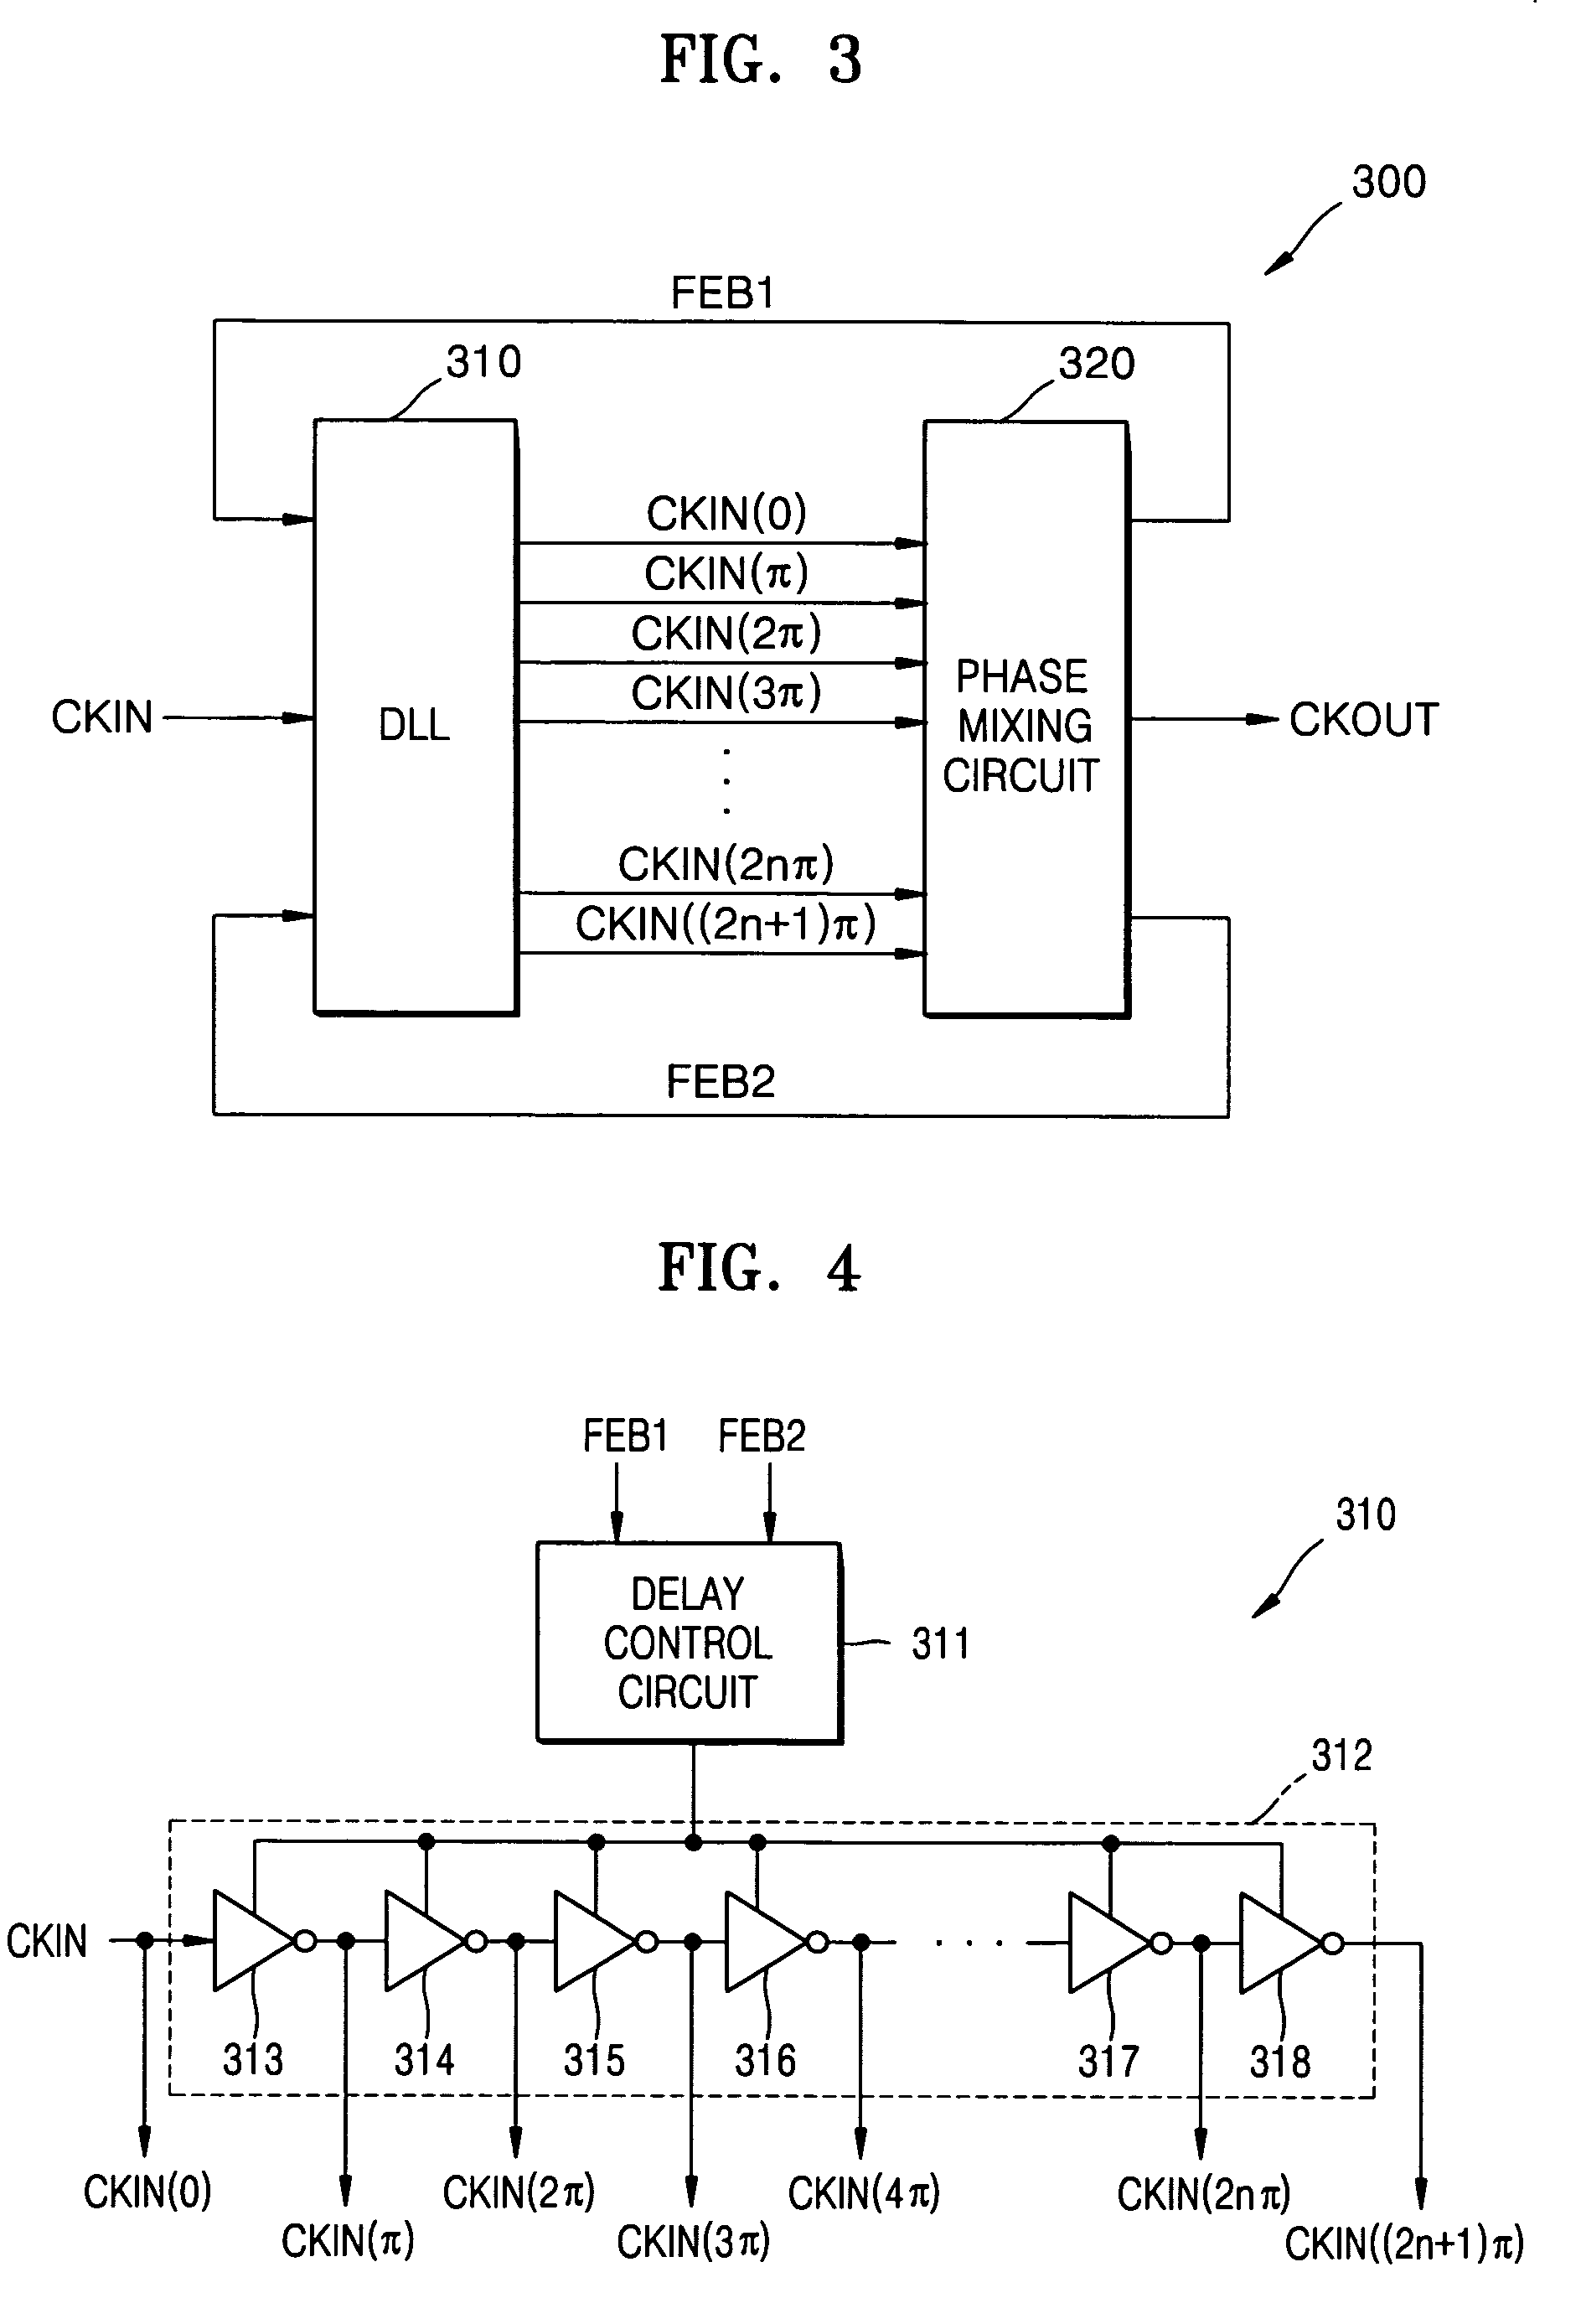 Clock signal generation circuits and methods using phase mixing of even and odd phased clock signals